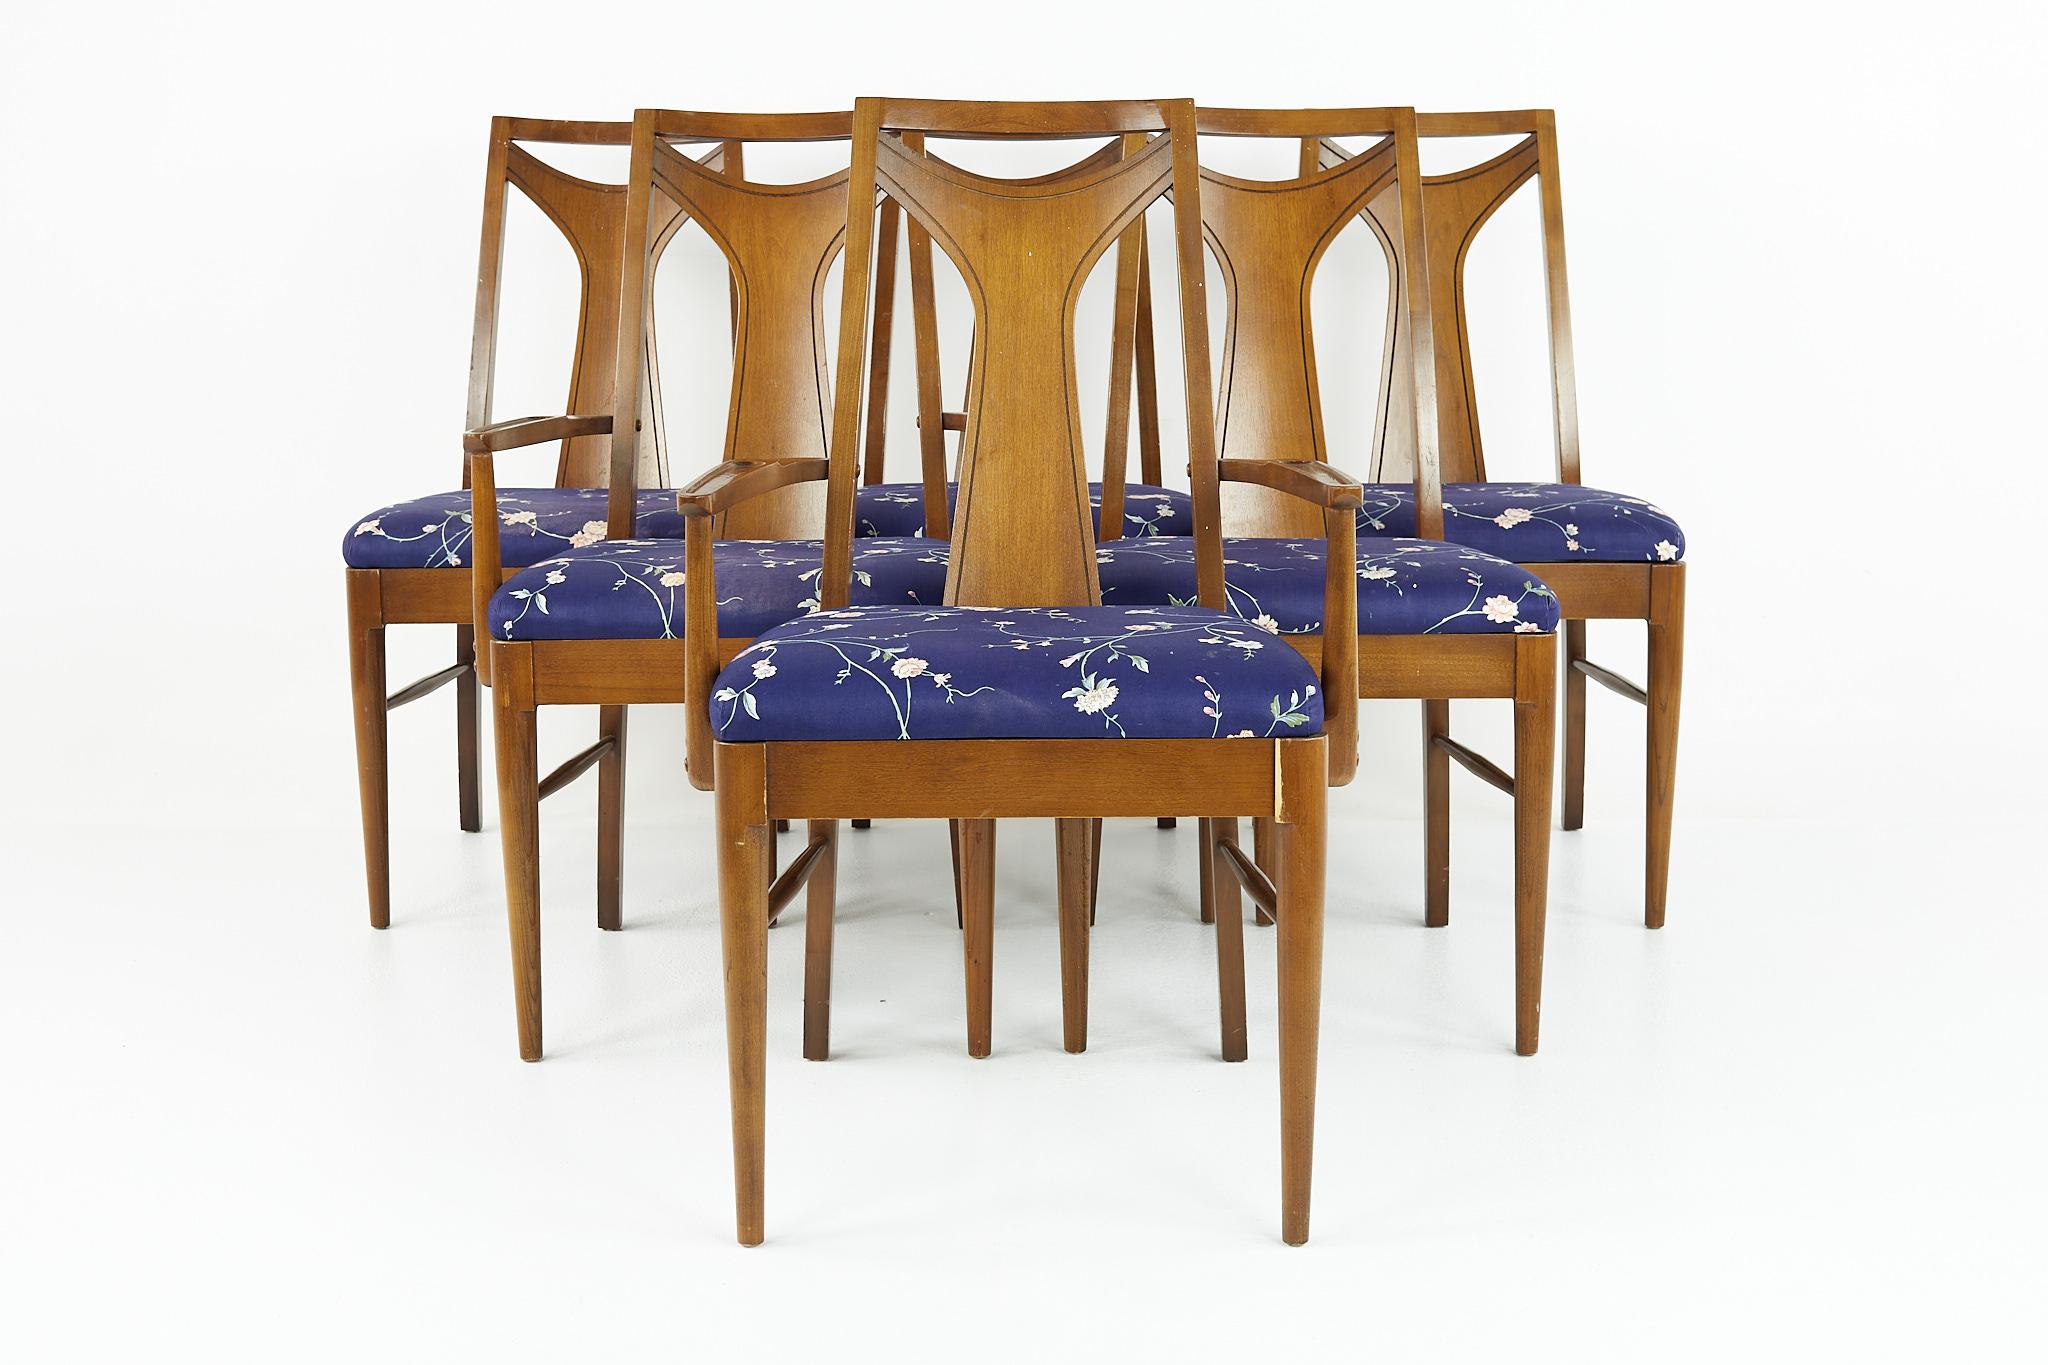 Kent Coffey Perspecta mid century walnut dining chairs - Set of 6

These chairs measure: 20.5 wide x 17 deep x 37.5 inches high, with a seat height of 19.5 inches

The captain chair measures: 22.5 wide x 17 deep x 37.5 inches high, with a seat